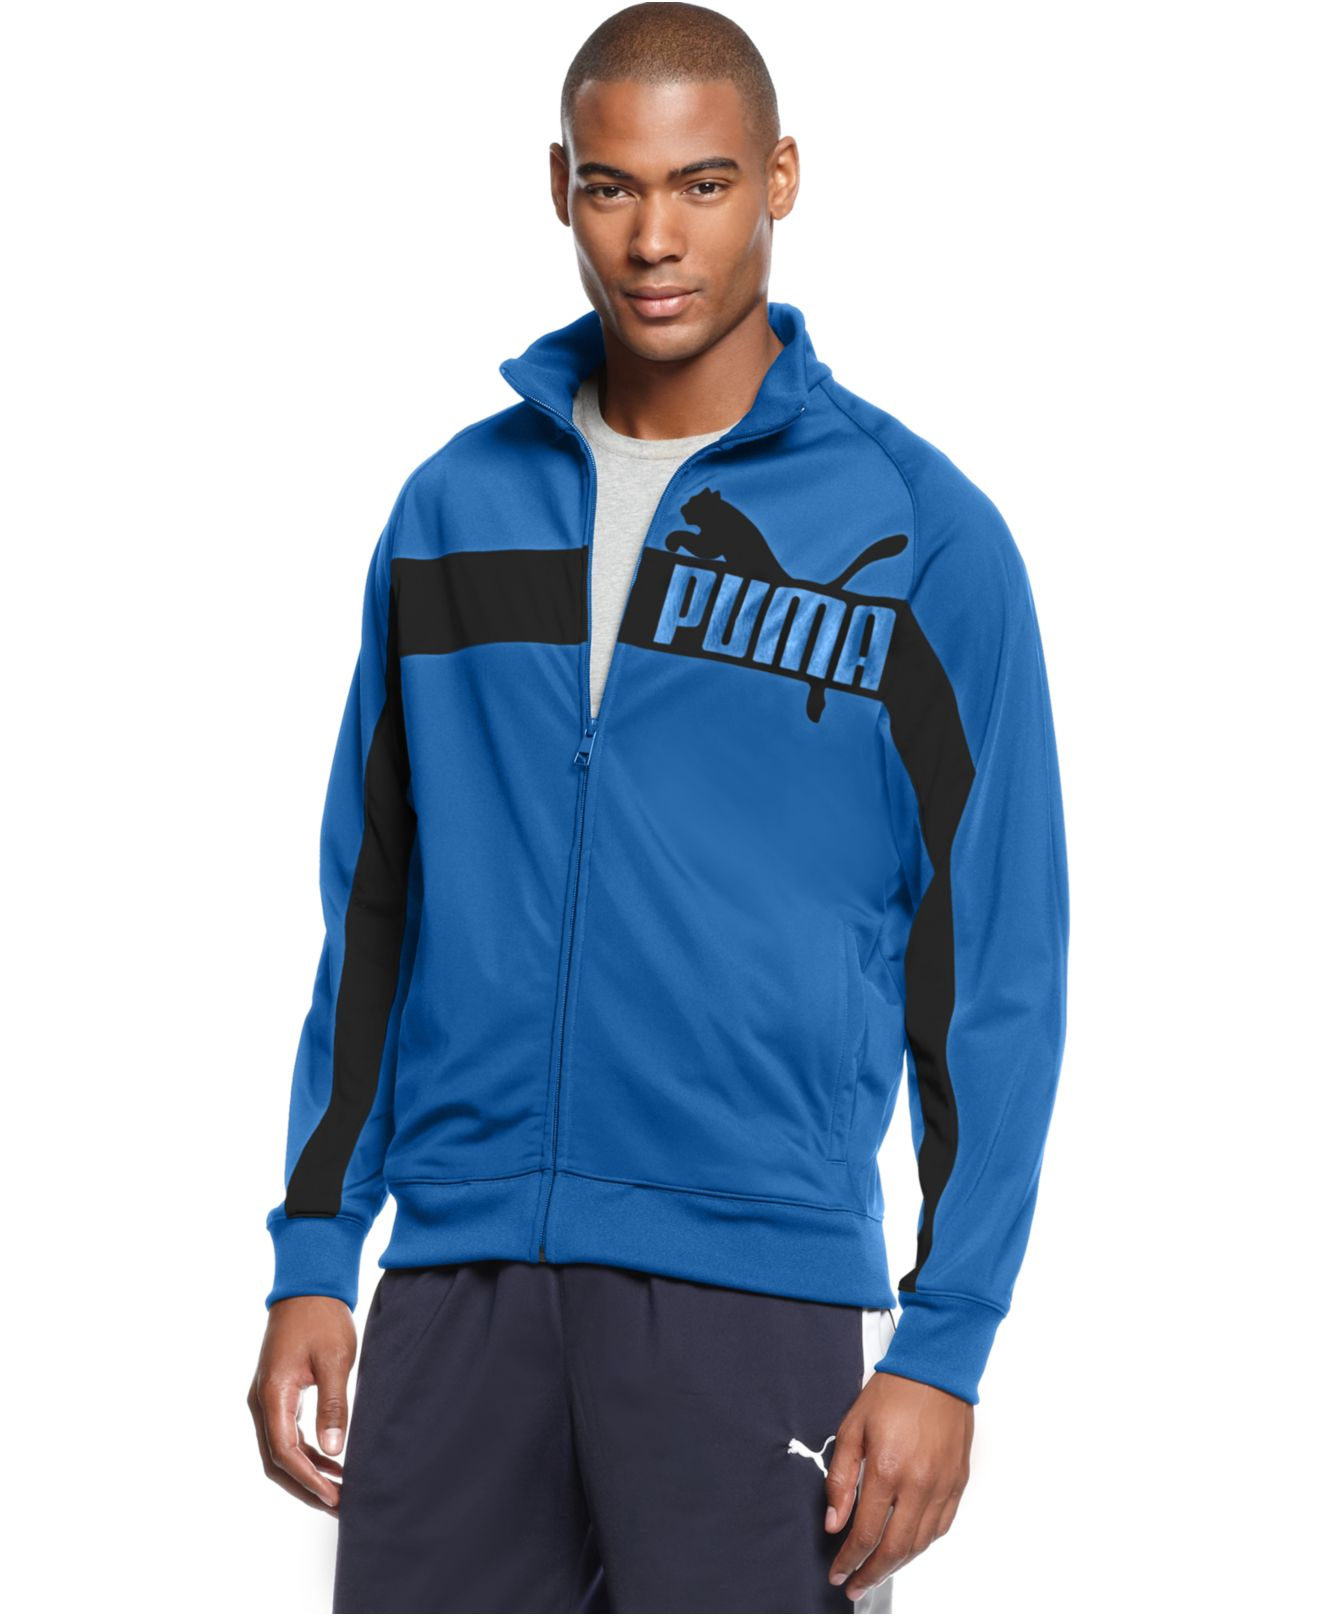 Lyst - Puma Tricot Track Jacket in Black for Men